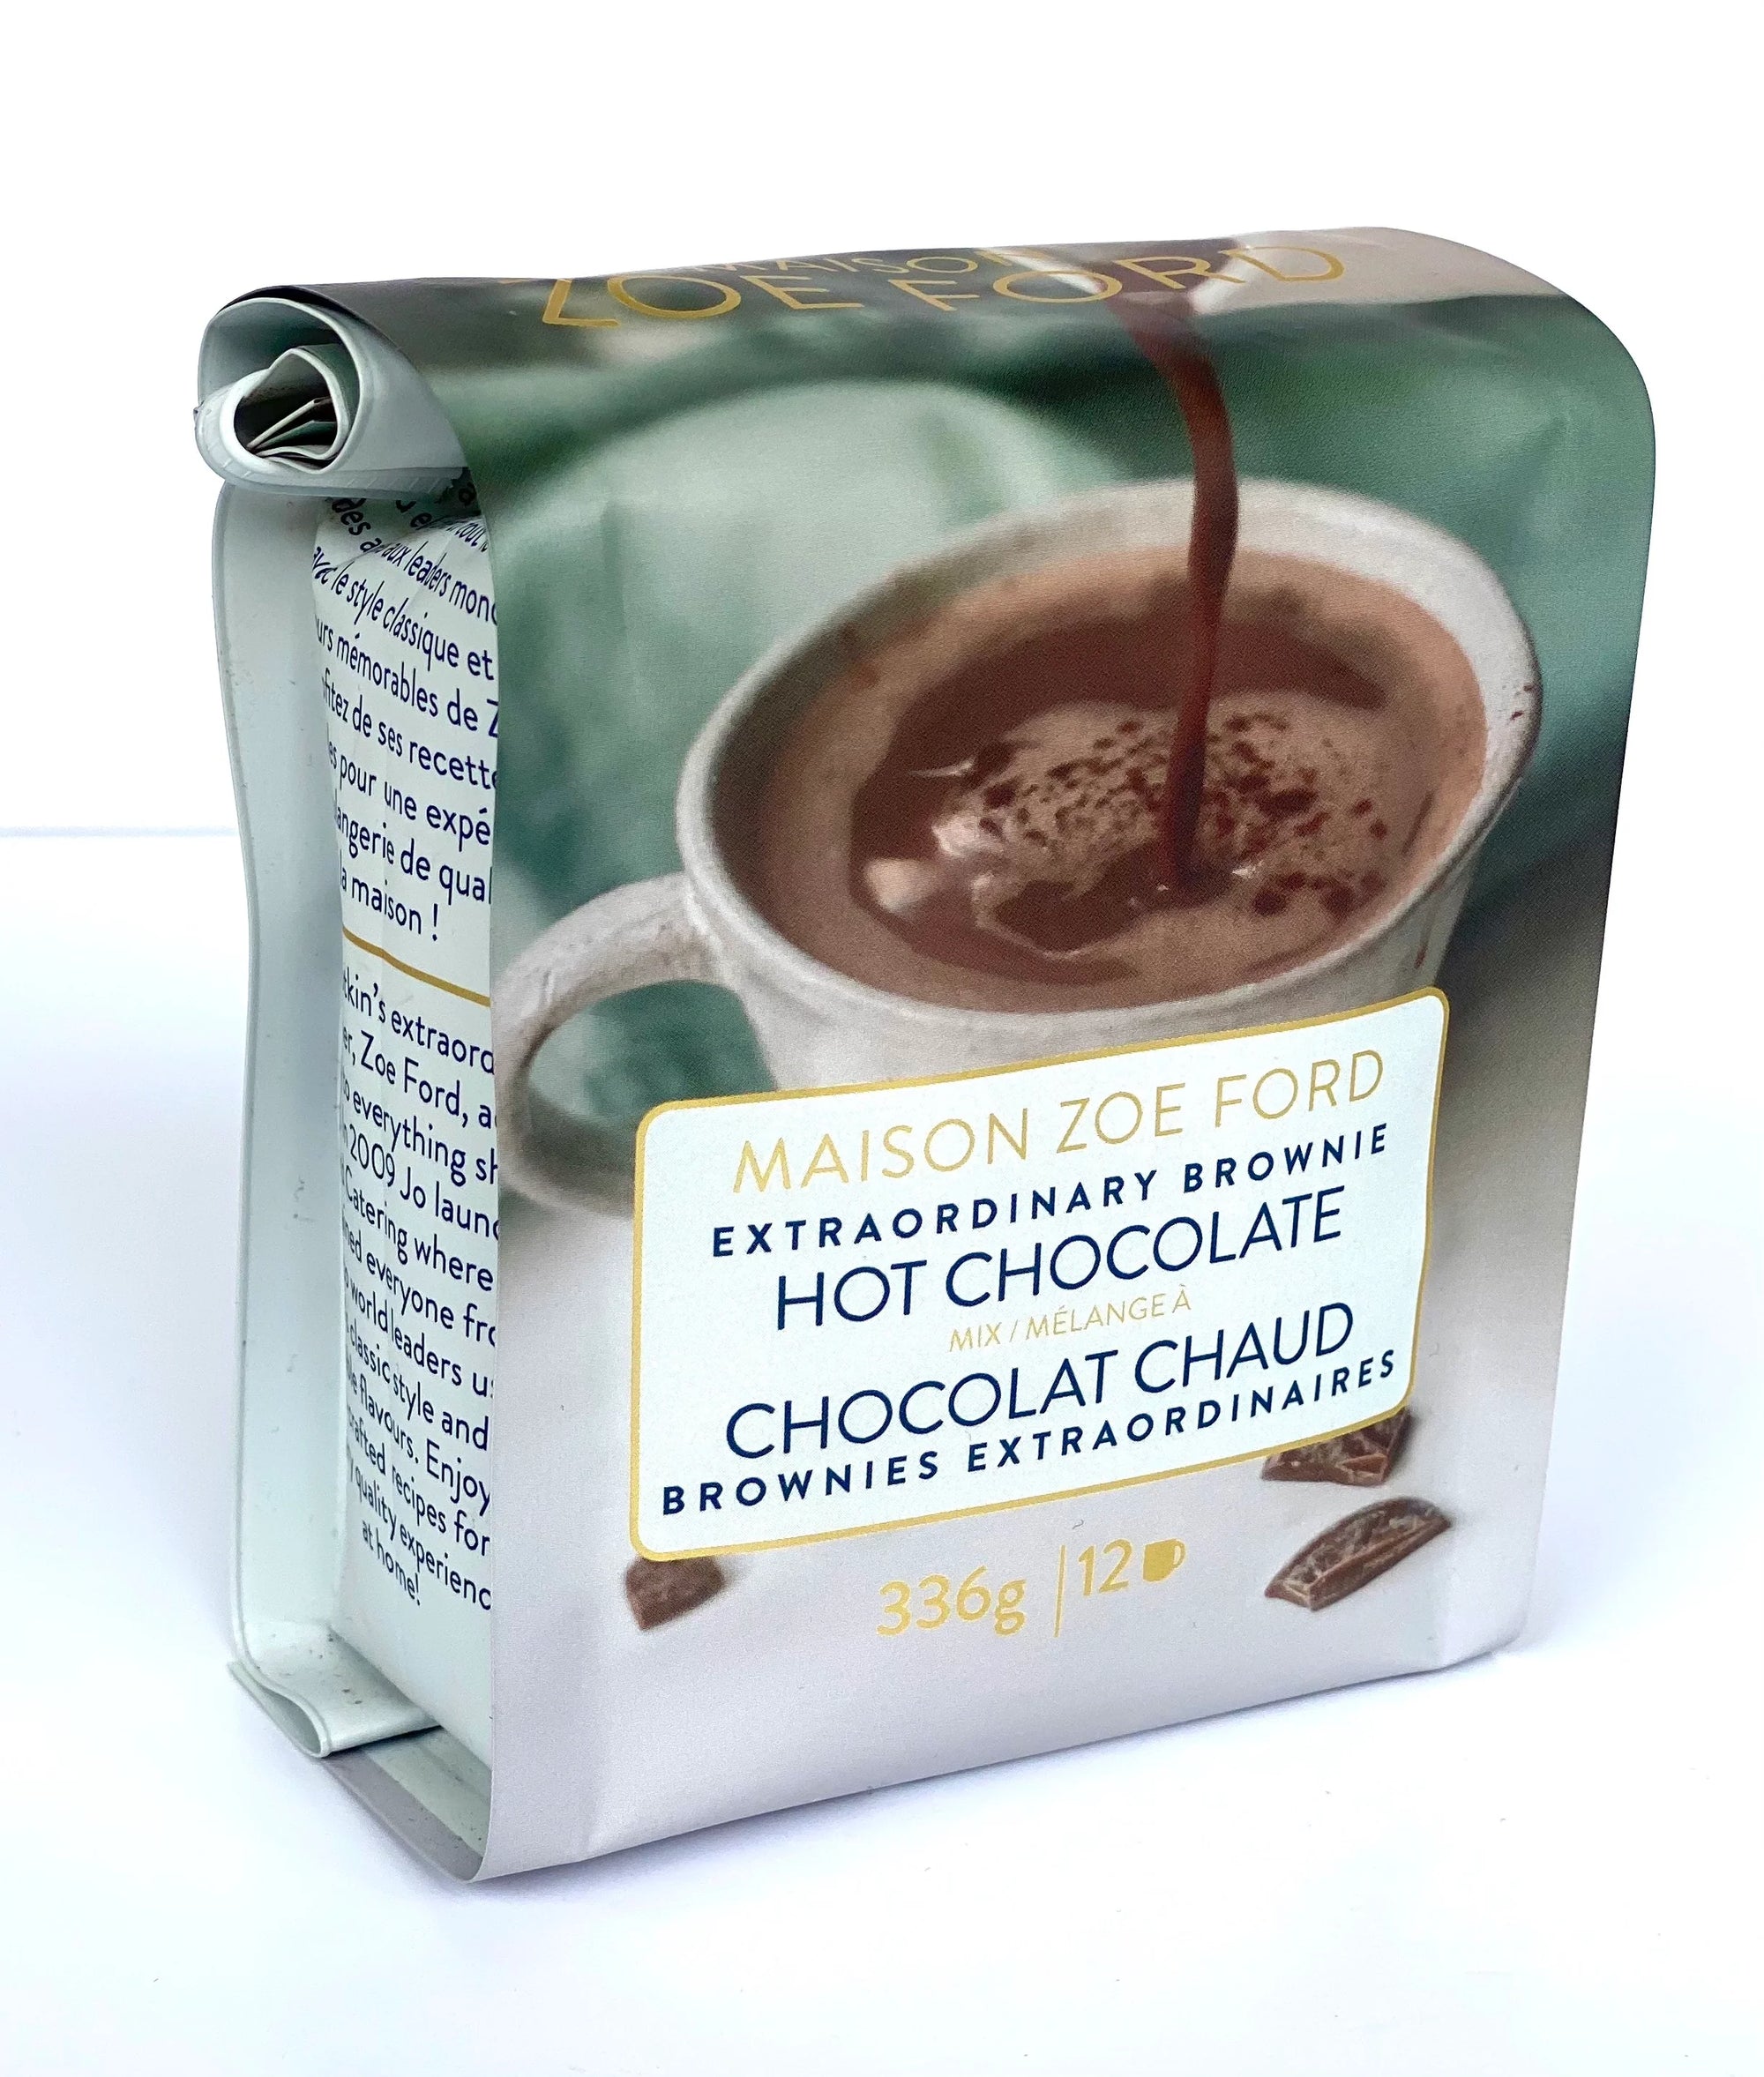 Hot Chocolate Extraordinary Brownie by Maison Zoe Ford 336 g 12 cups